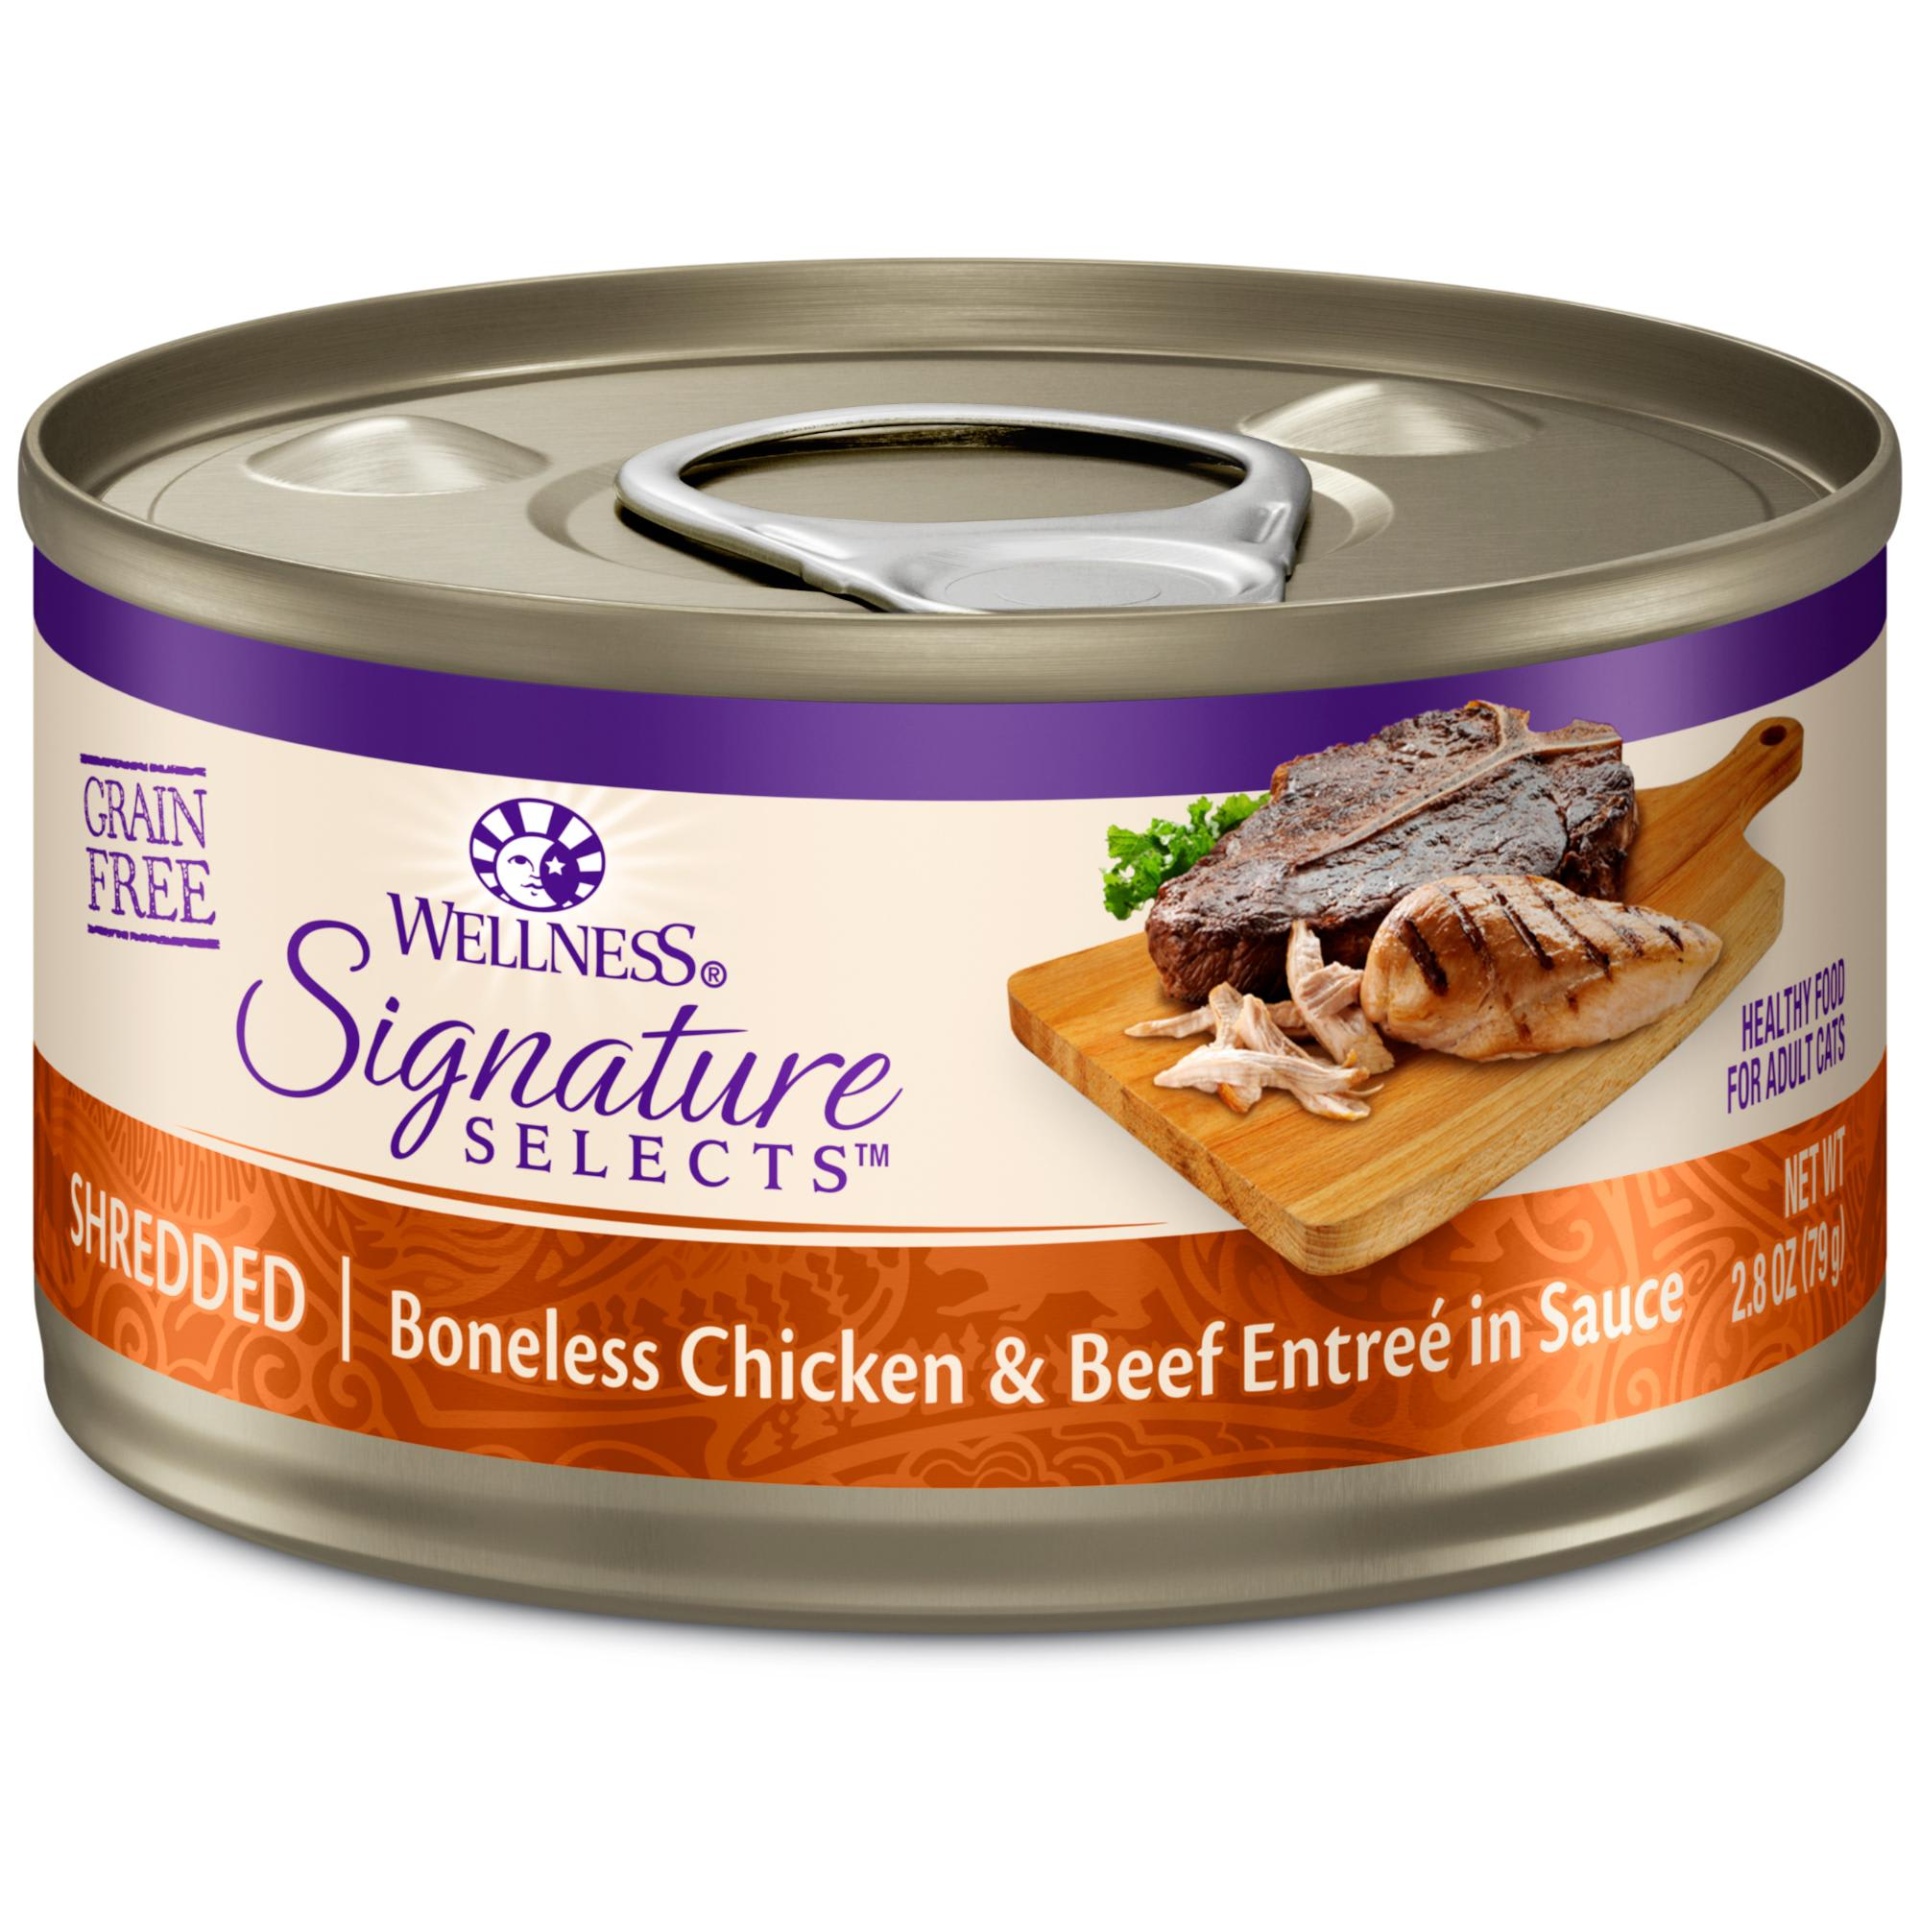 slide 1 of 1, Wellness Signature Selects Grain Free Shredded White Meat Chicken Beef Entree Canned Cat Food28 Ozcase Of 24, 1 ct